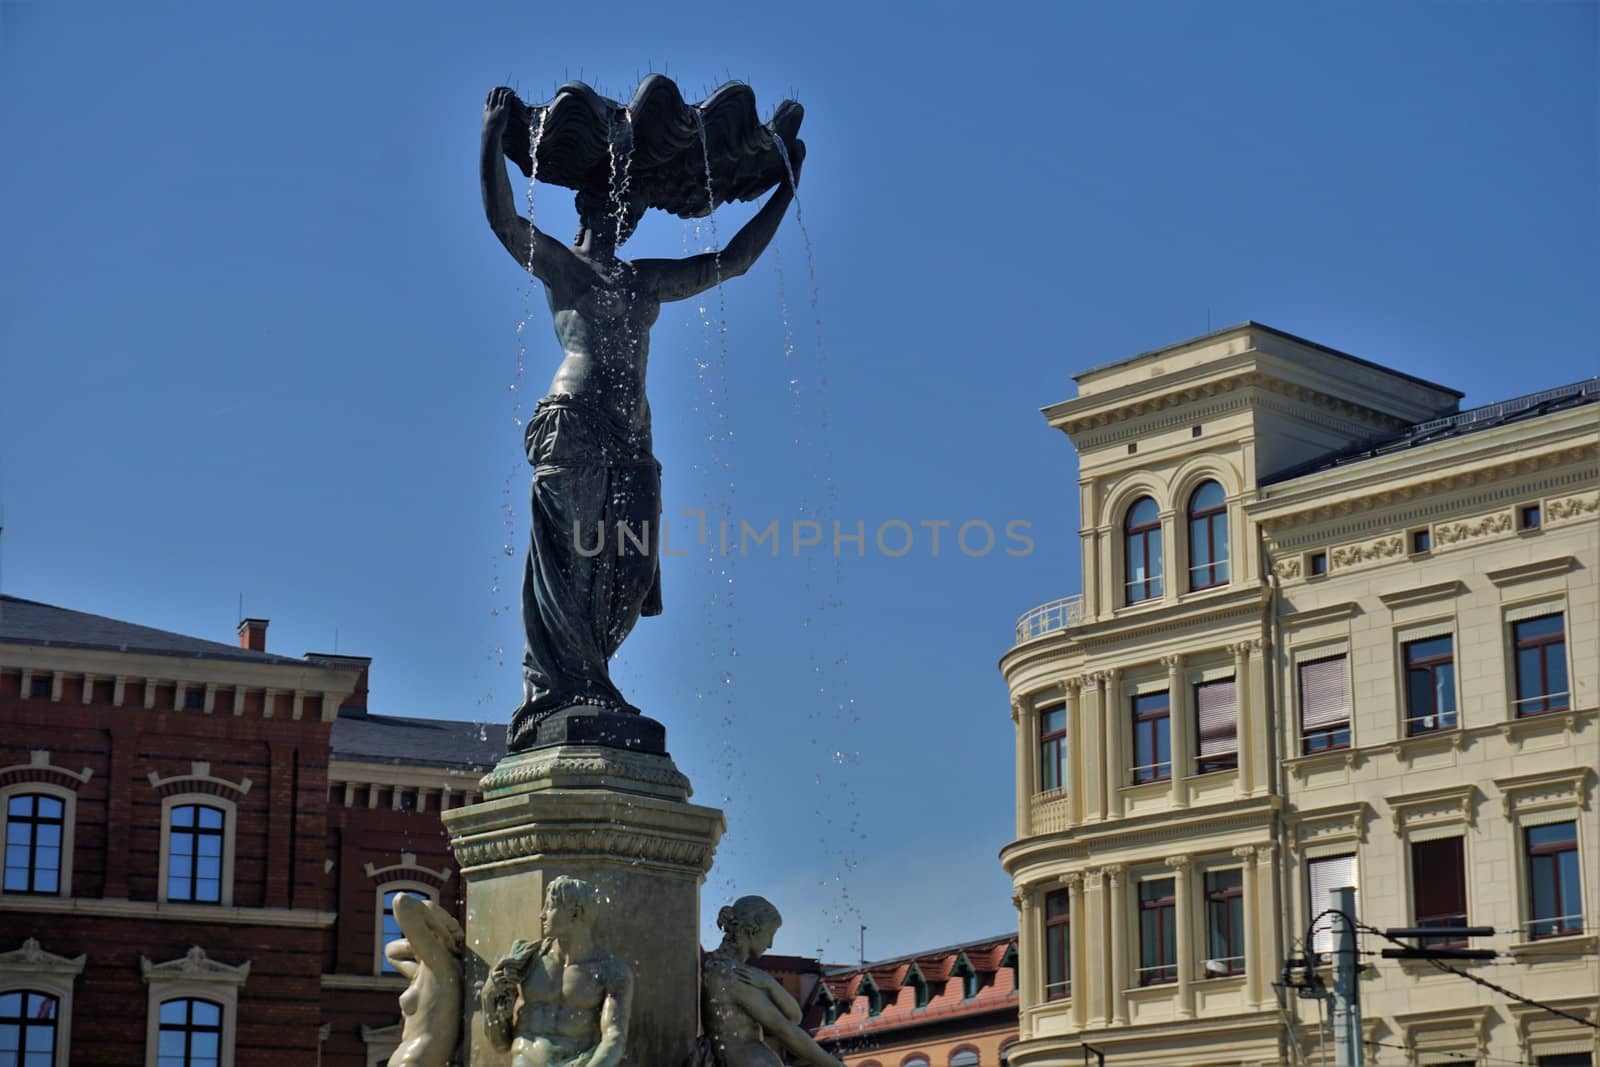 Clam maid fountain on the Post Square in the city of Goerlitz, Germany